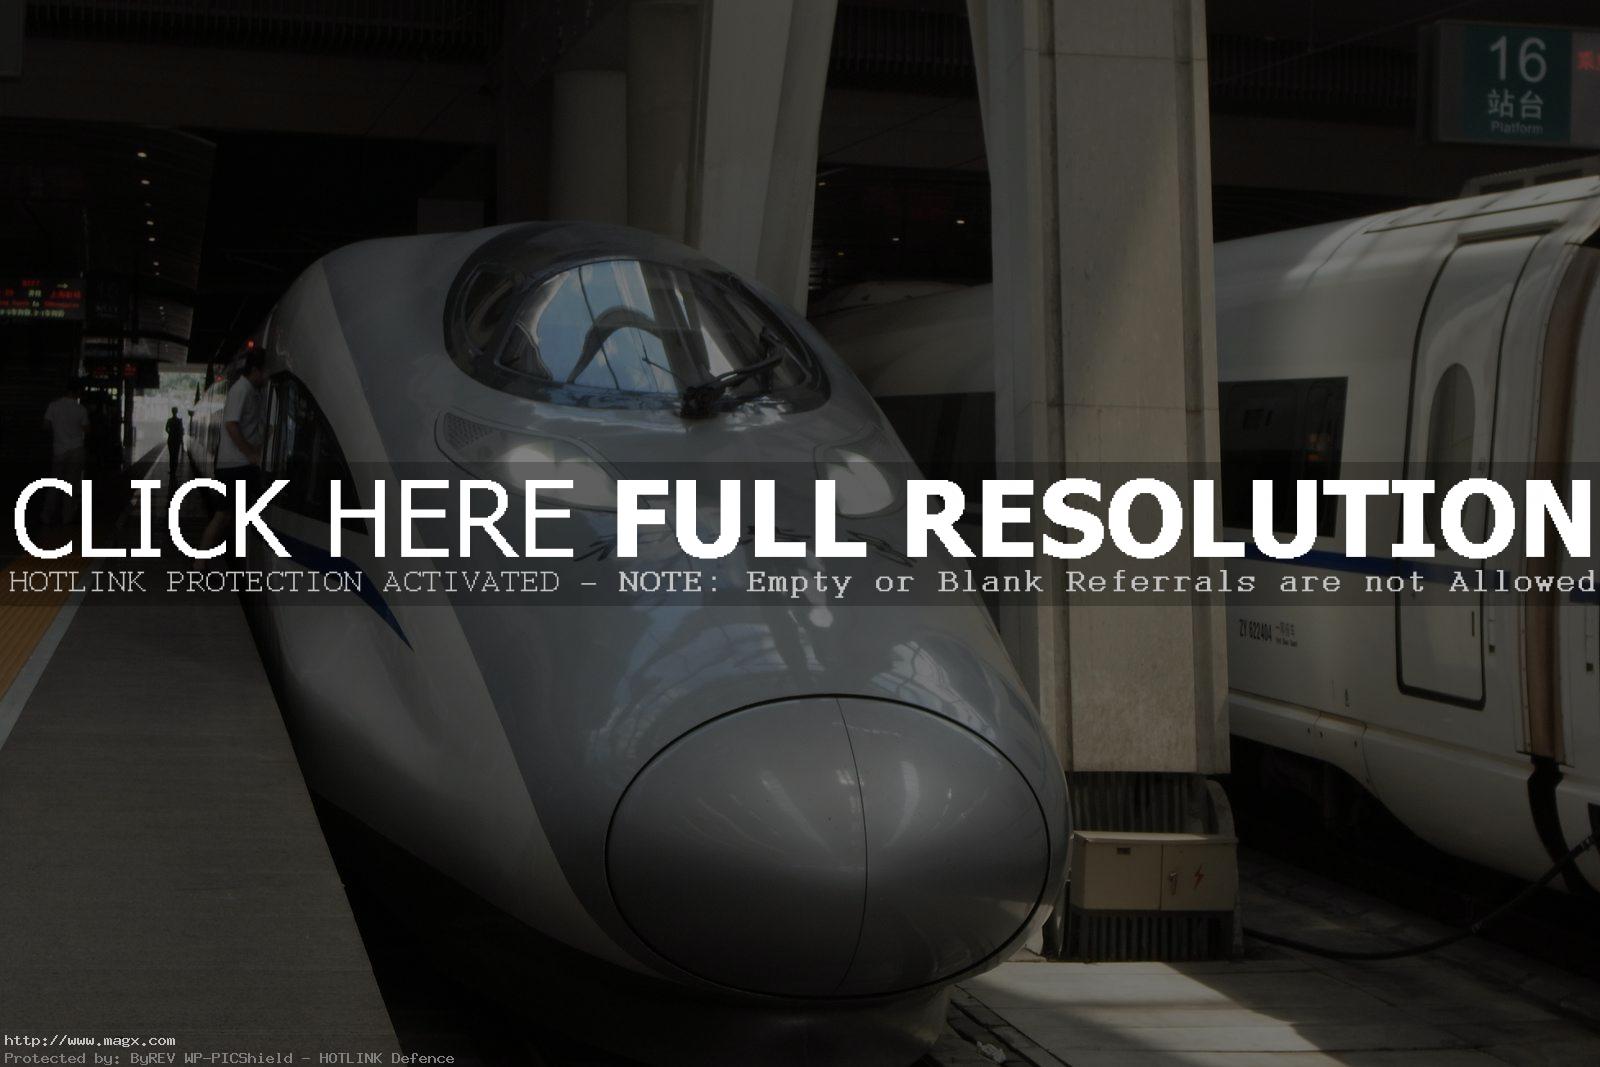 crh380a3 CRH380A   The World Fastest Trains is China